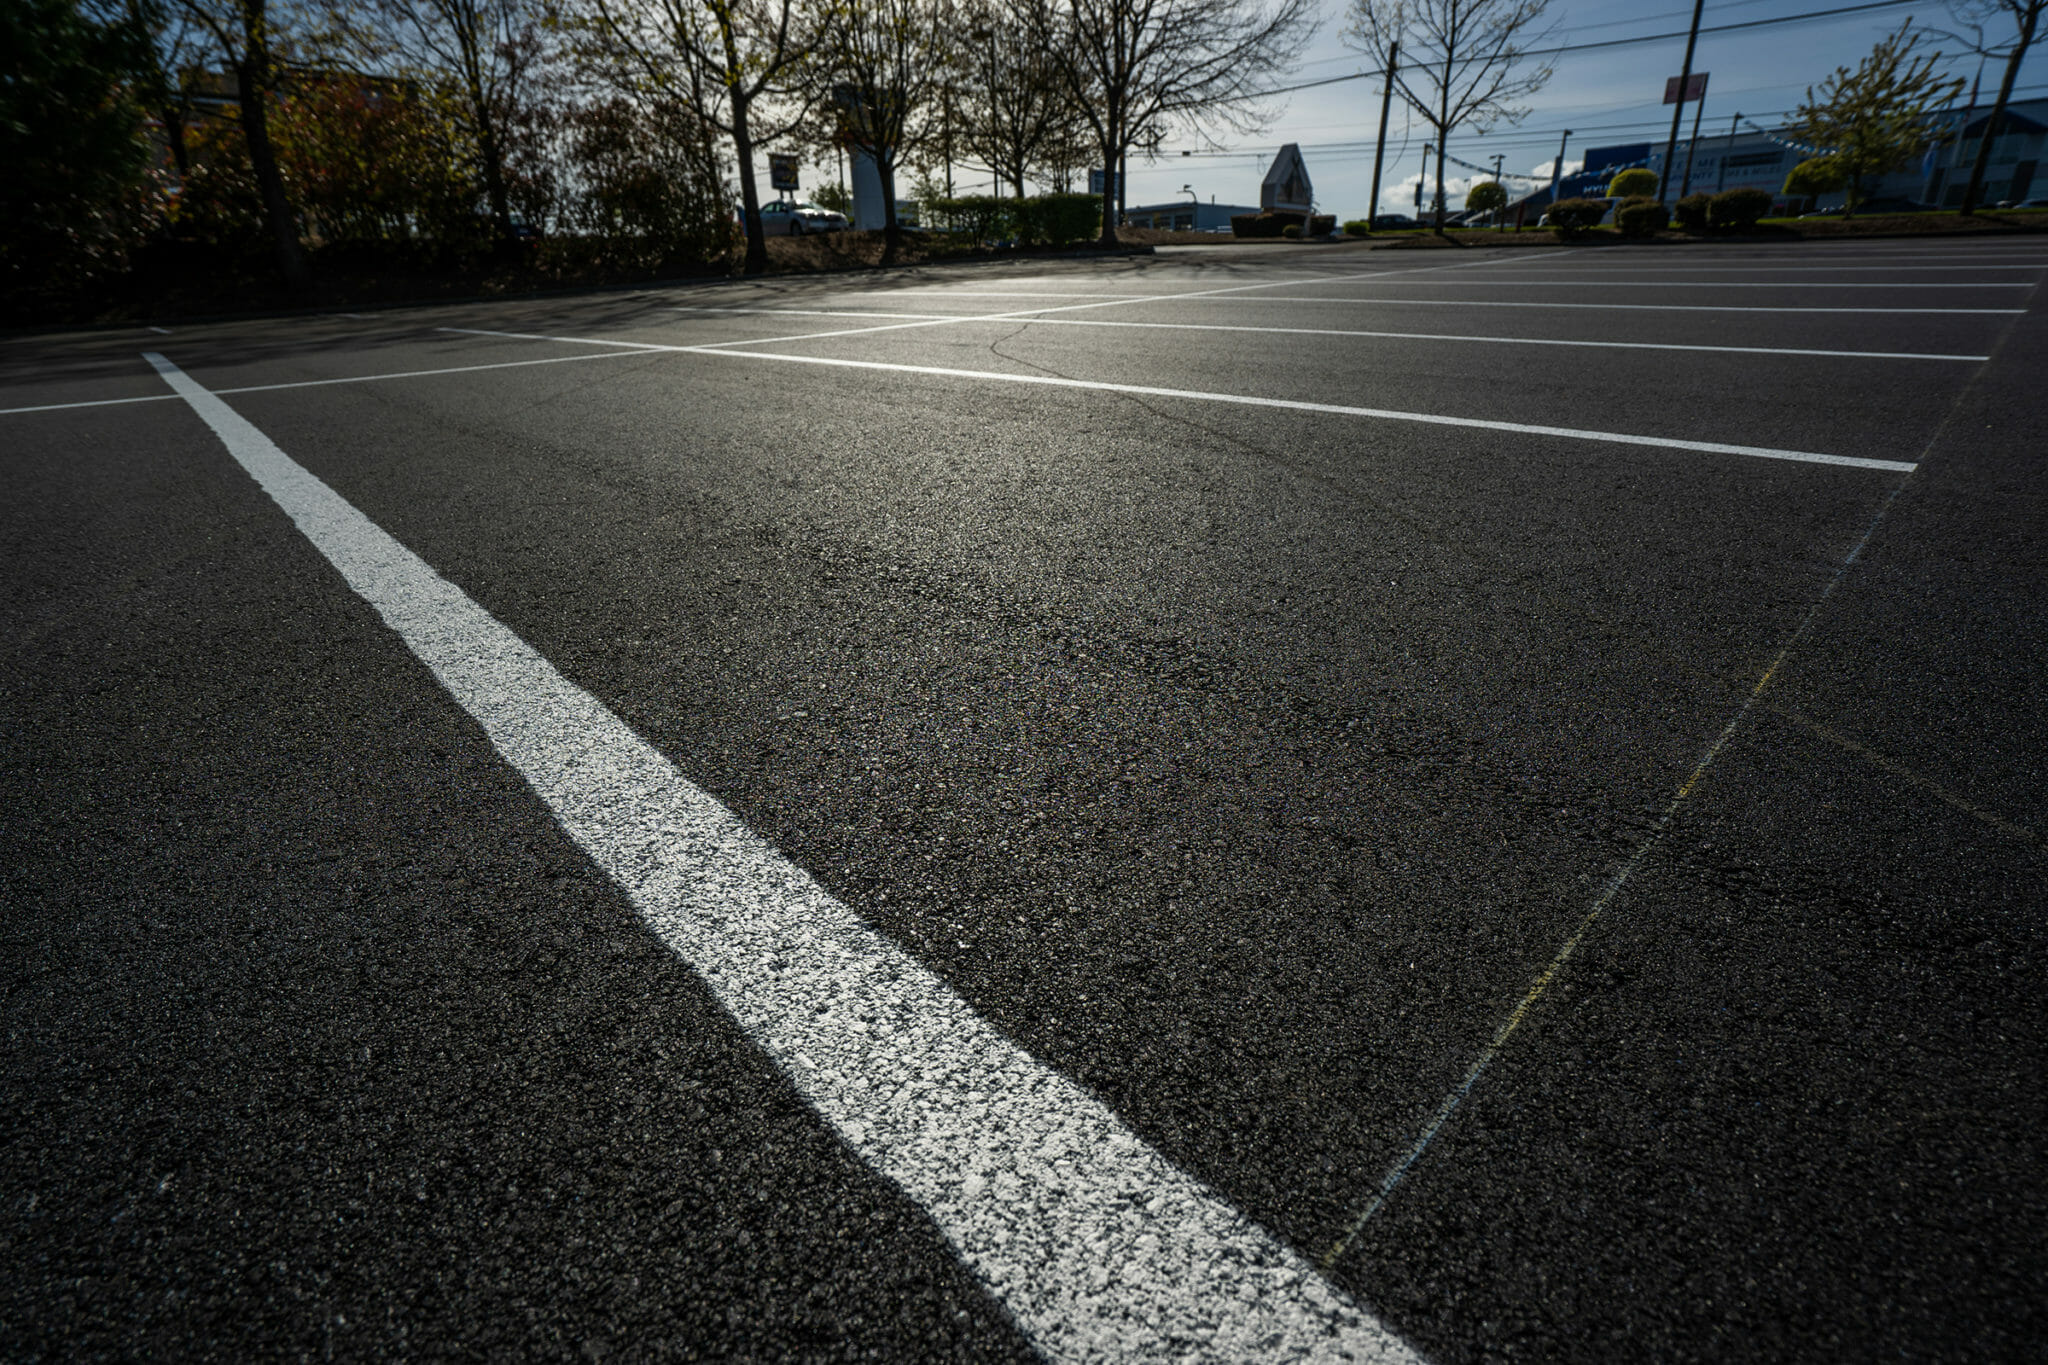 Can Your Parking Lot Increase Your Property Value?